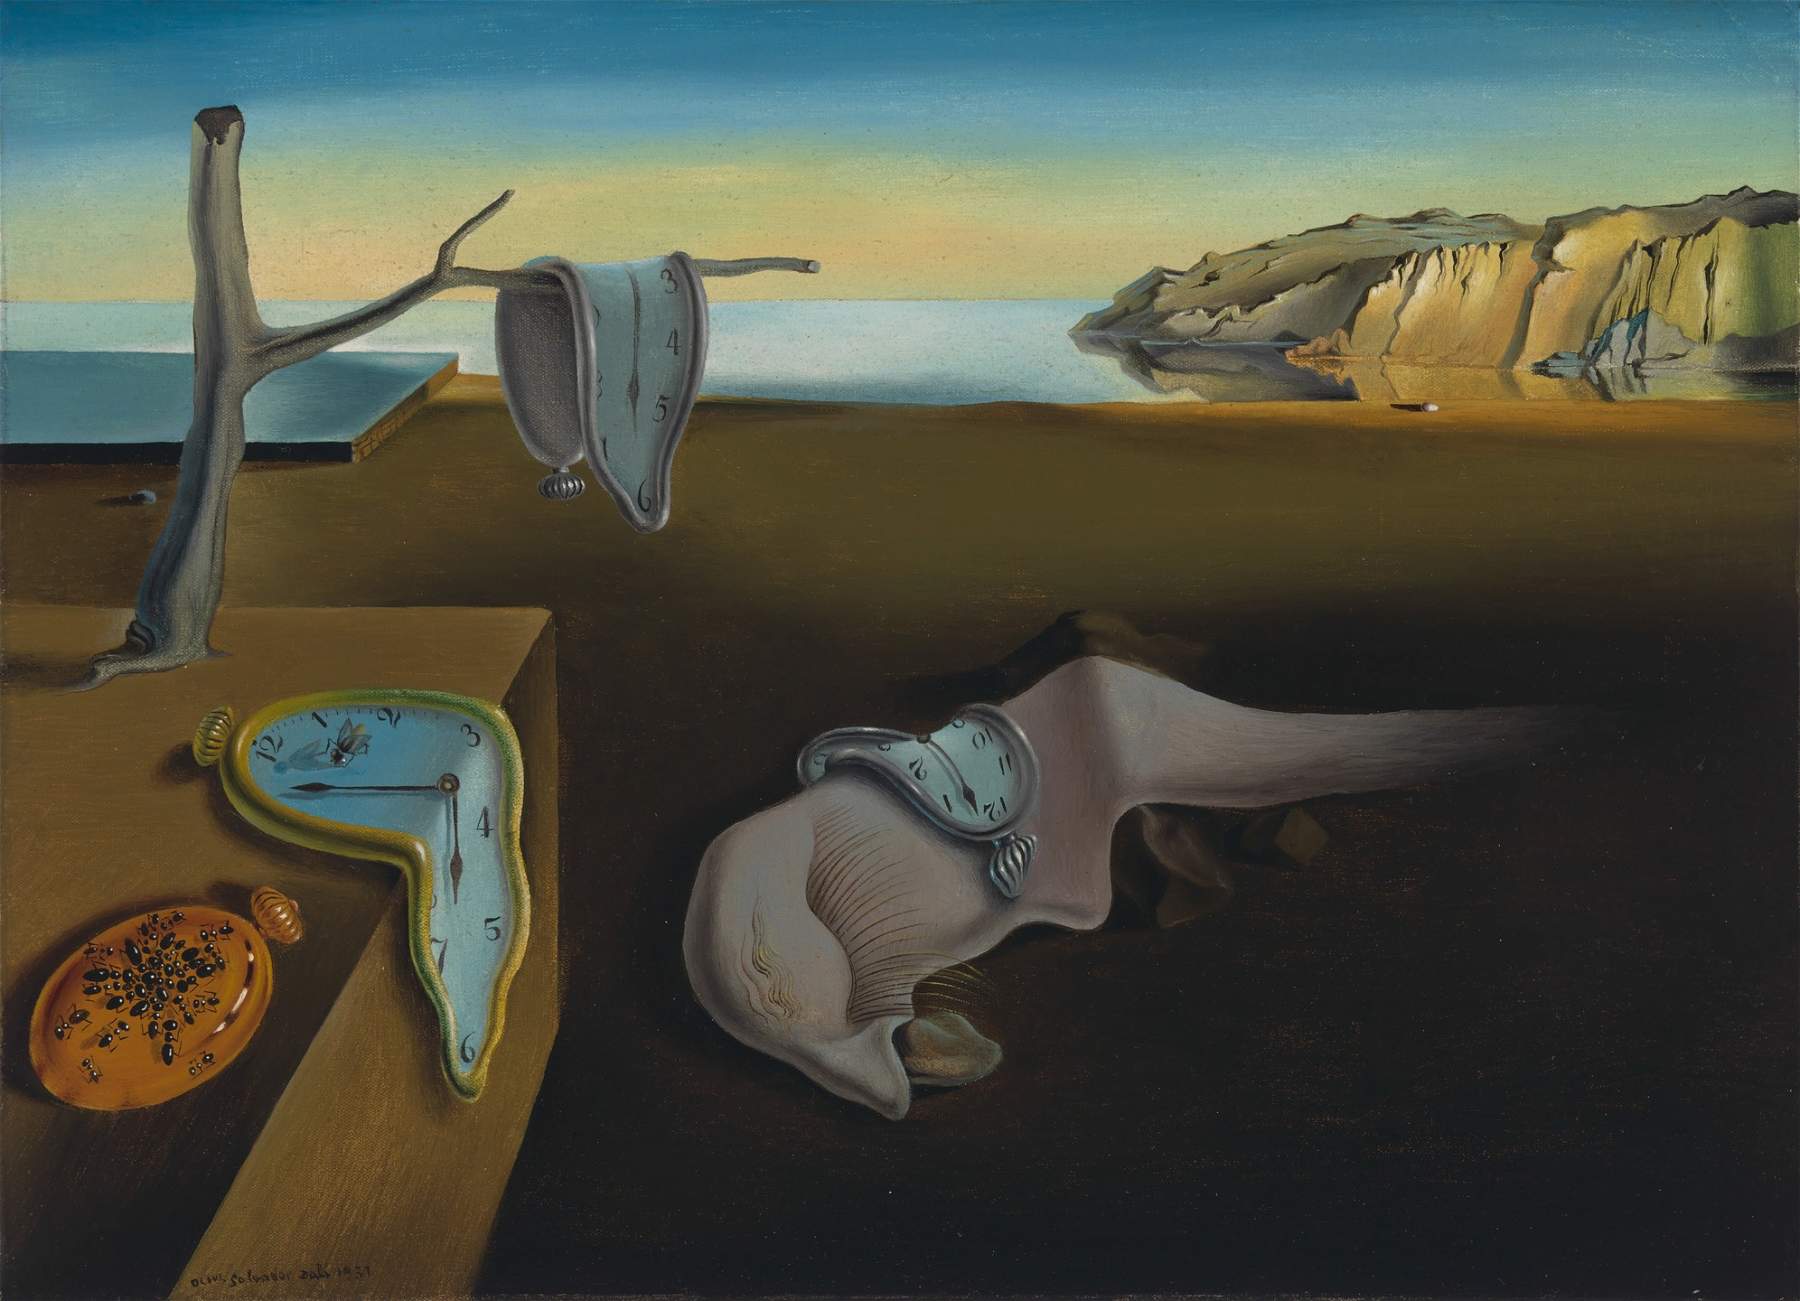 Salvador DalÃ­: life and works of the father of paranoid-critical surrealism